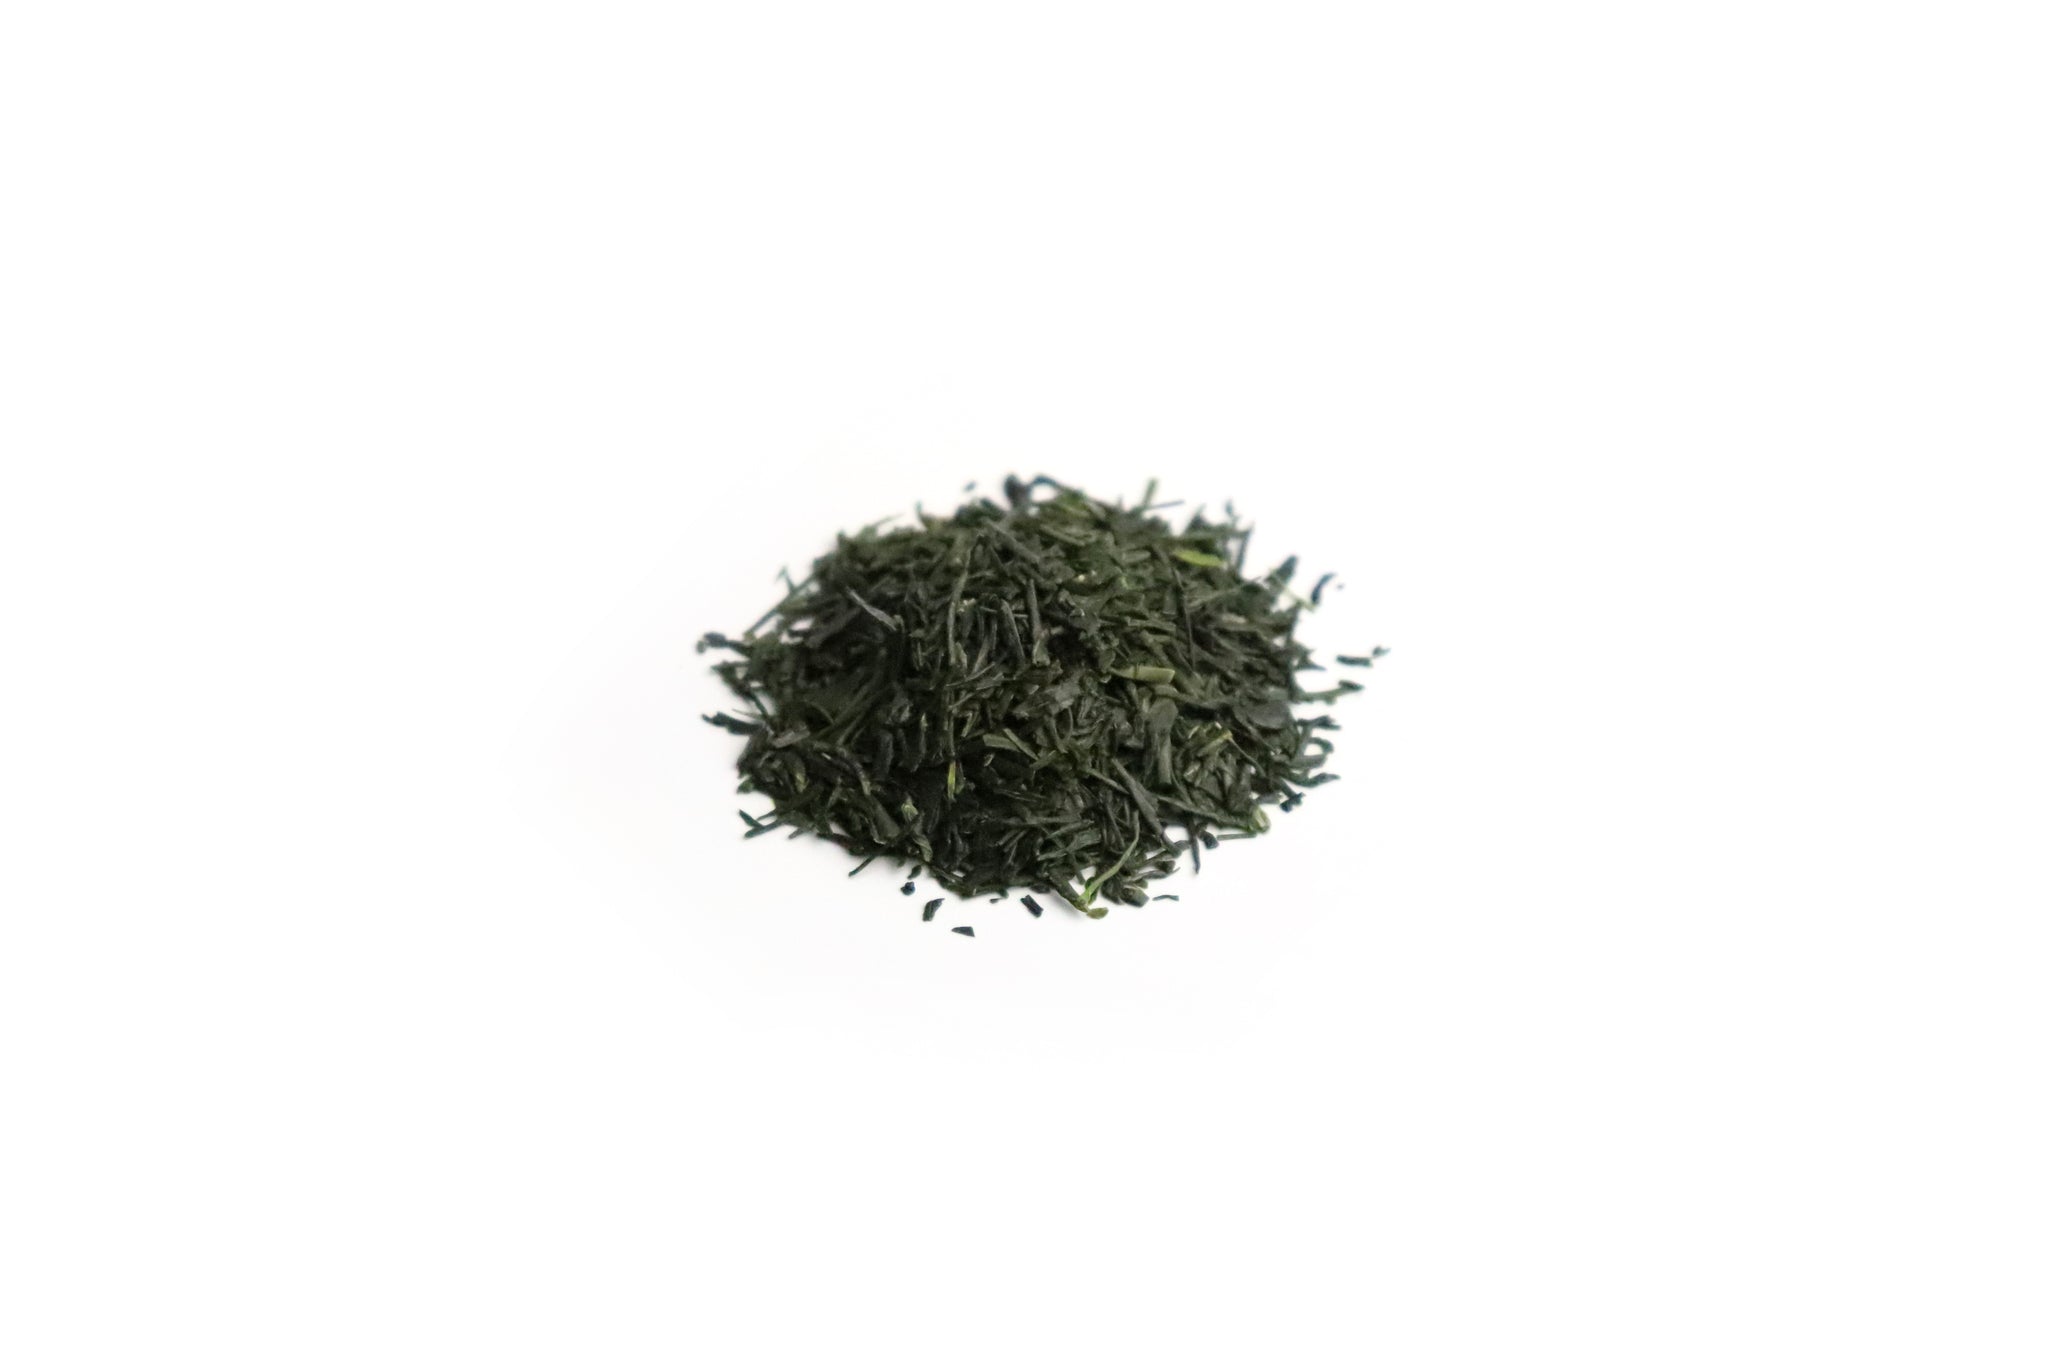 【Pre-Order】Shincha | The first picked tea of ​​2024 from Kyoto